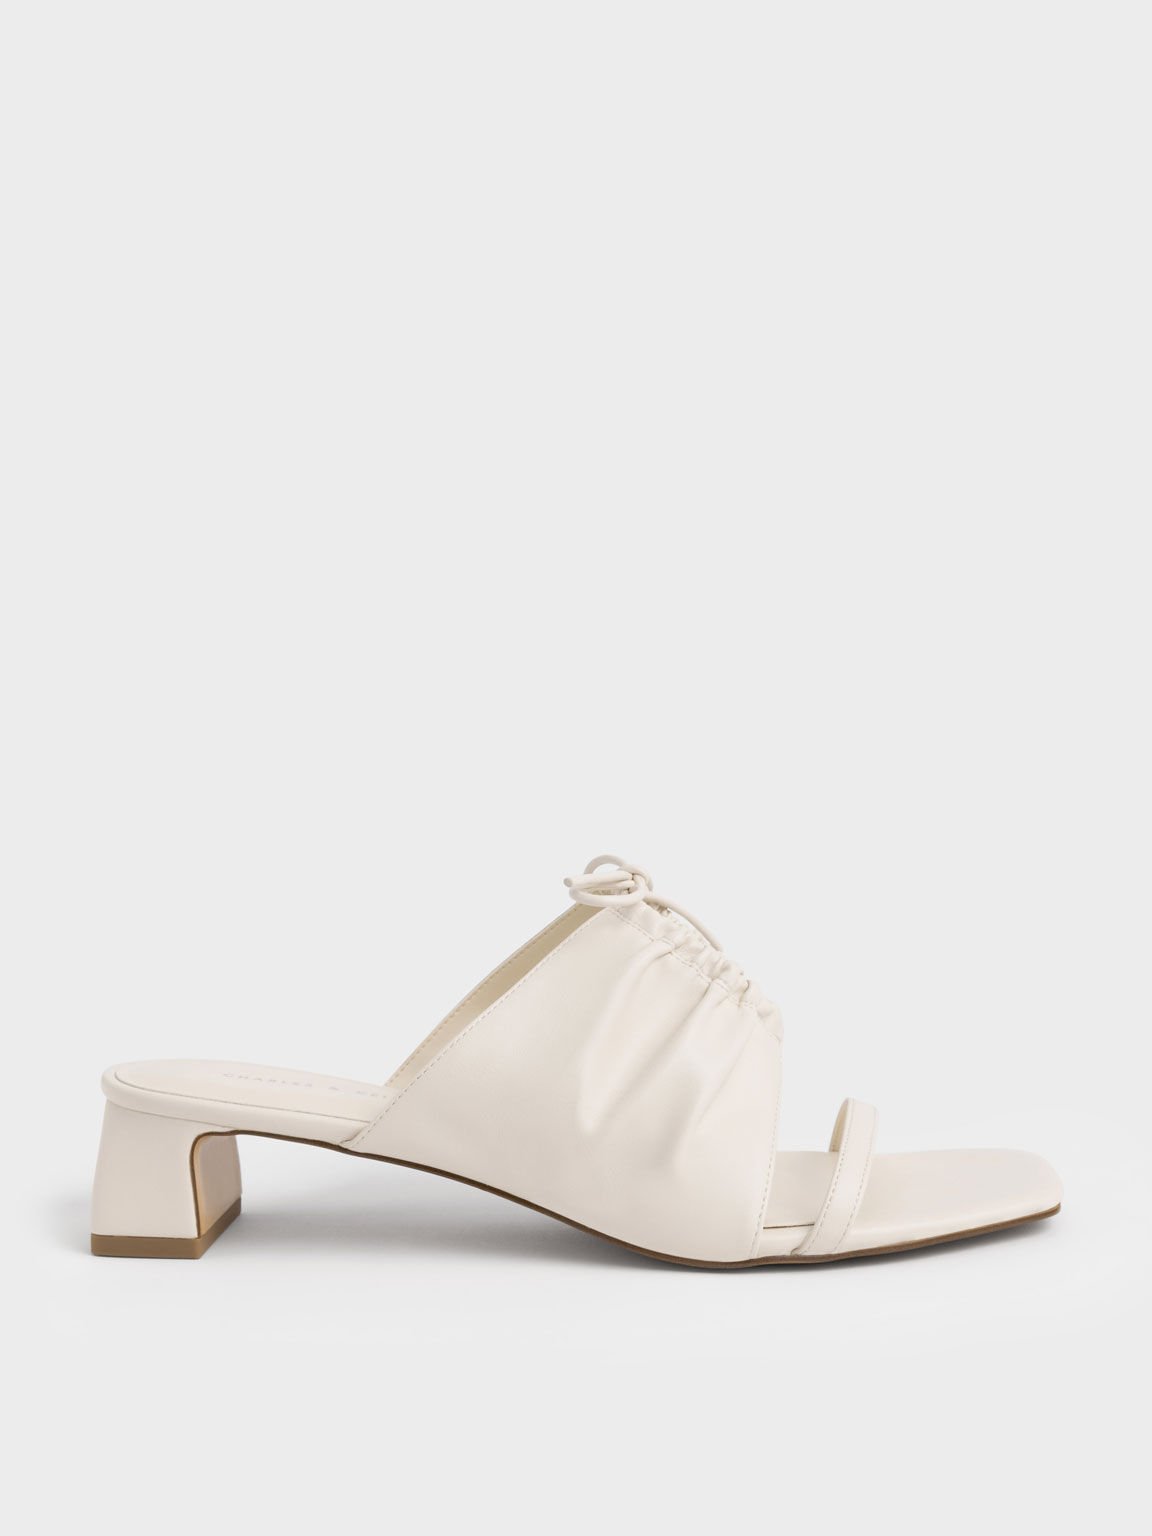 Sandal Mules Bow-Tie Ruched Heeled, Cream, hi-res